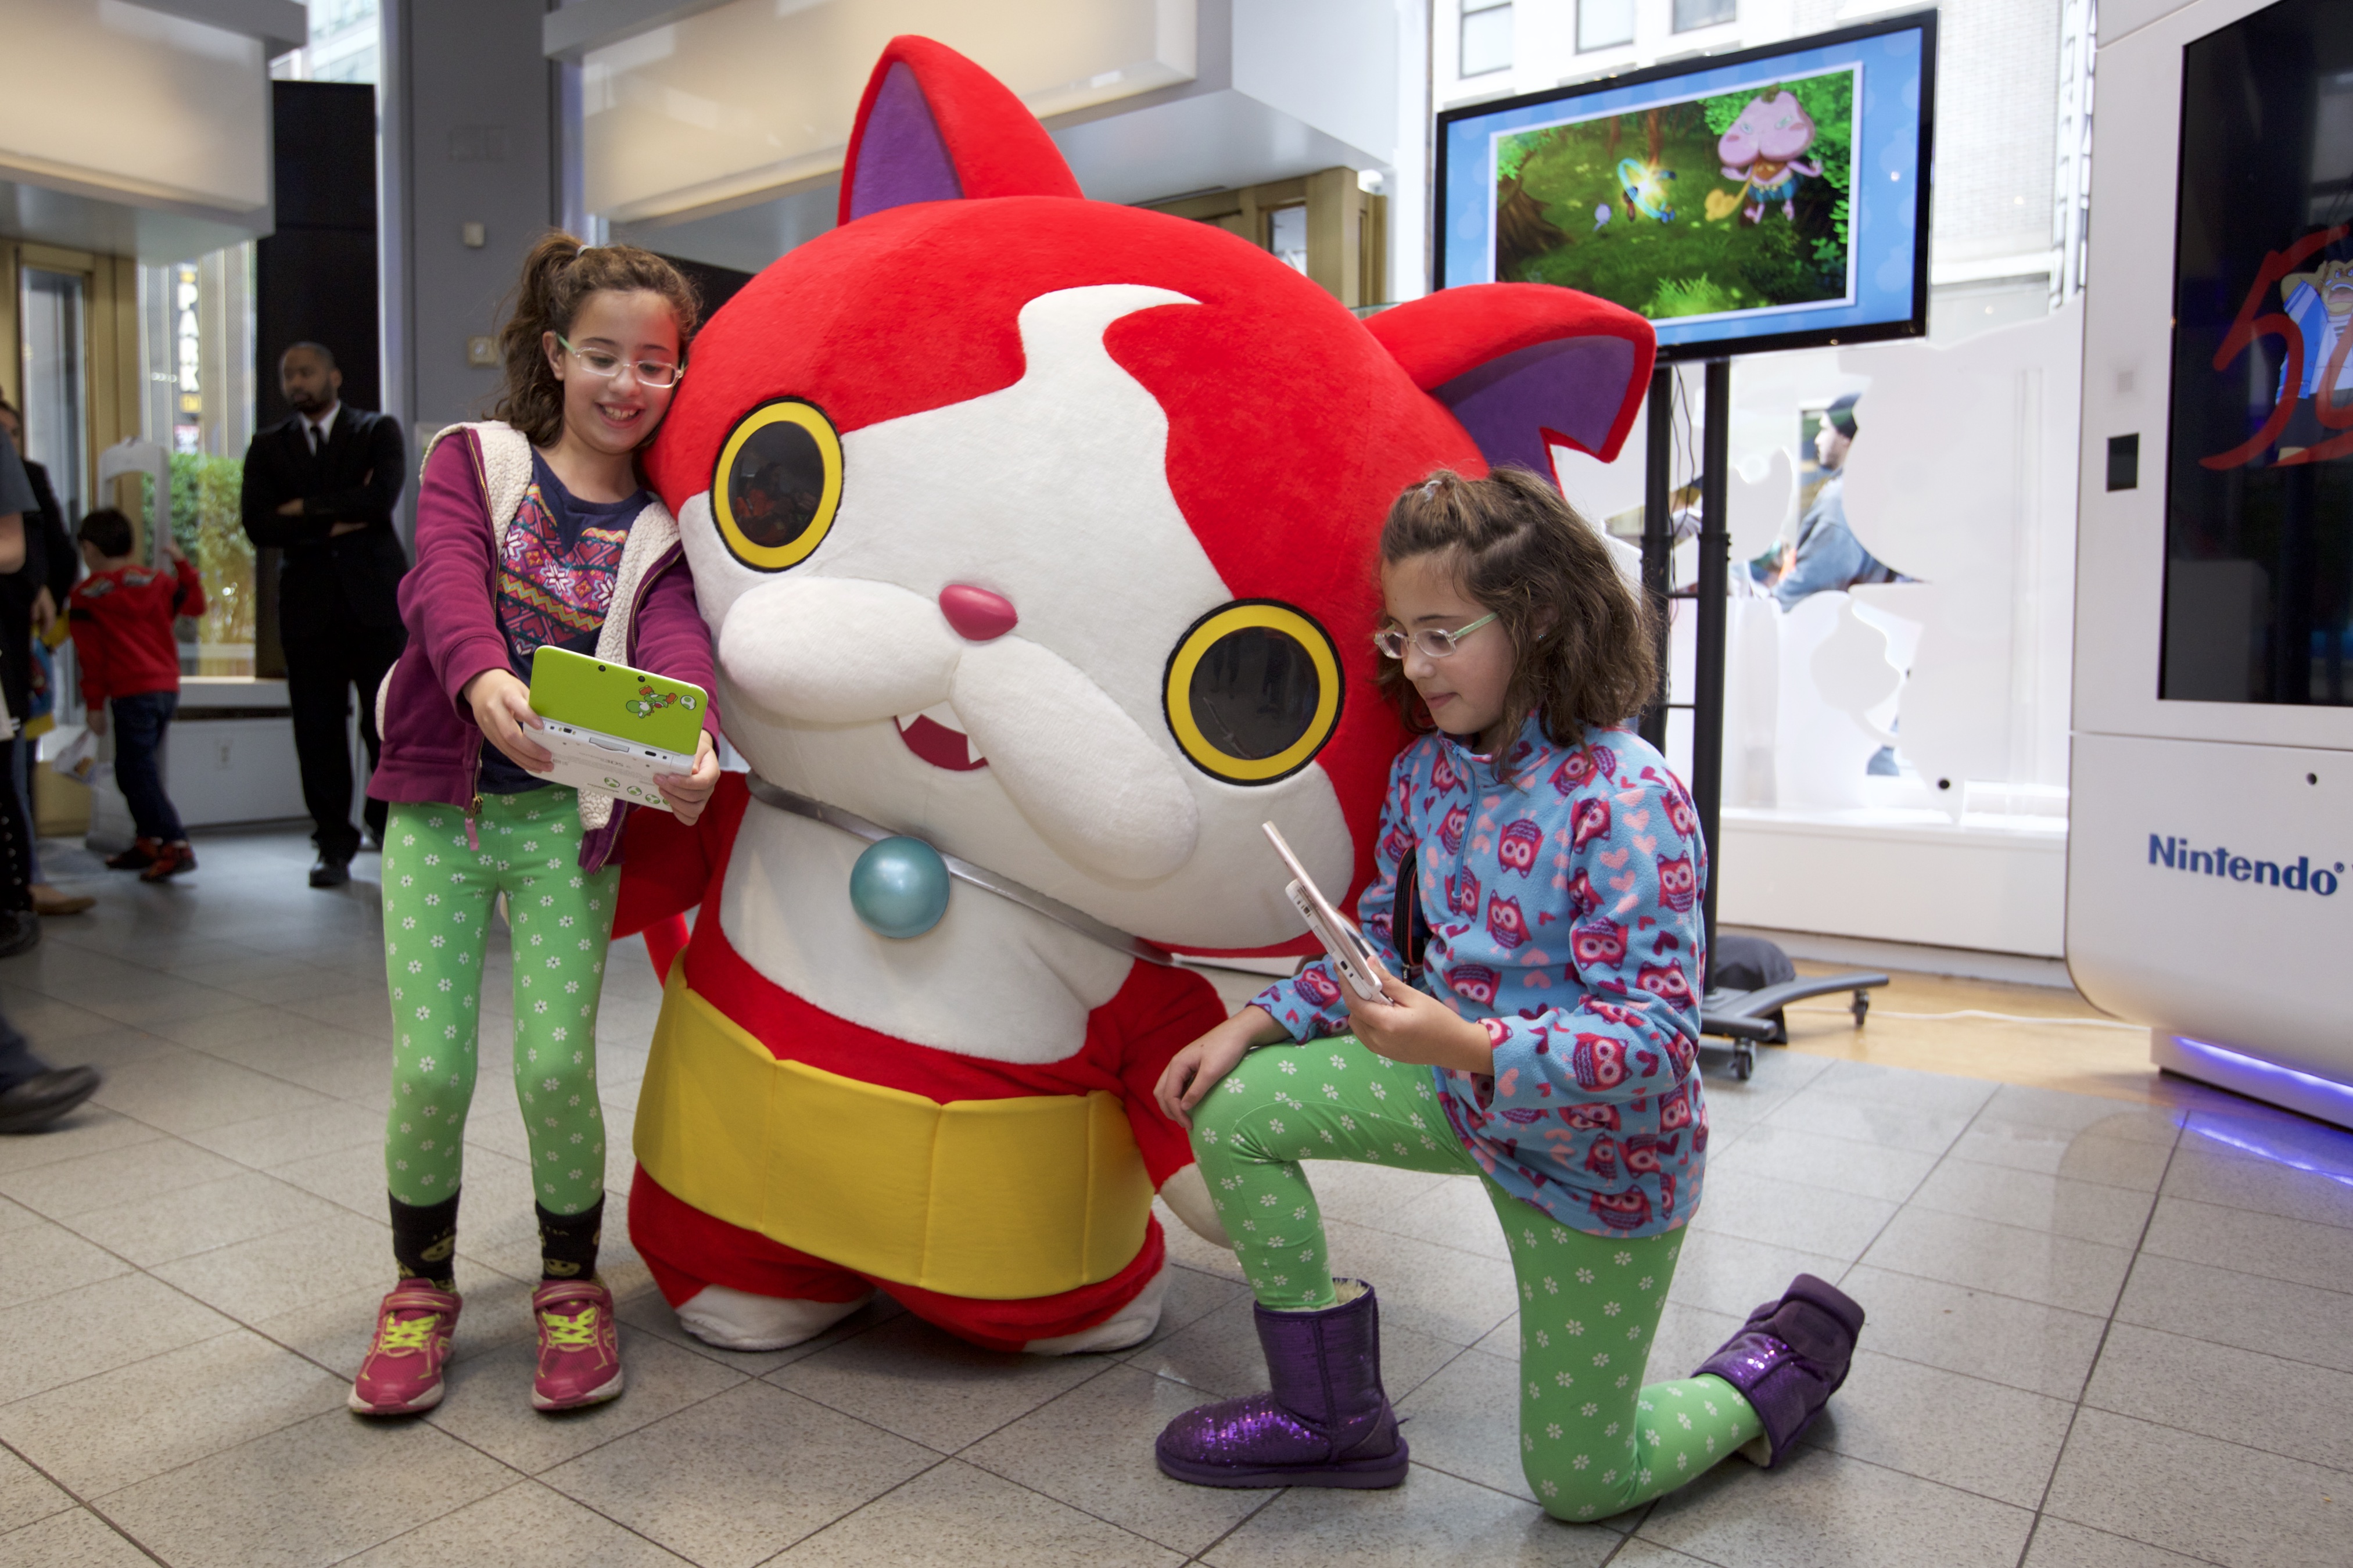 In this photo provided by Nintendo of America, fans meet and interact with YO-KAI WATCH character Jibanyan at Nintendo World in New York on Nov. 7, 2015, as part of the YO-KAI WATCH launch event. YO-KAI WATCH launched on Nov. 6, 2015 and is available exclusively for the Nintendo 3DS family of systems.